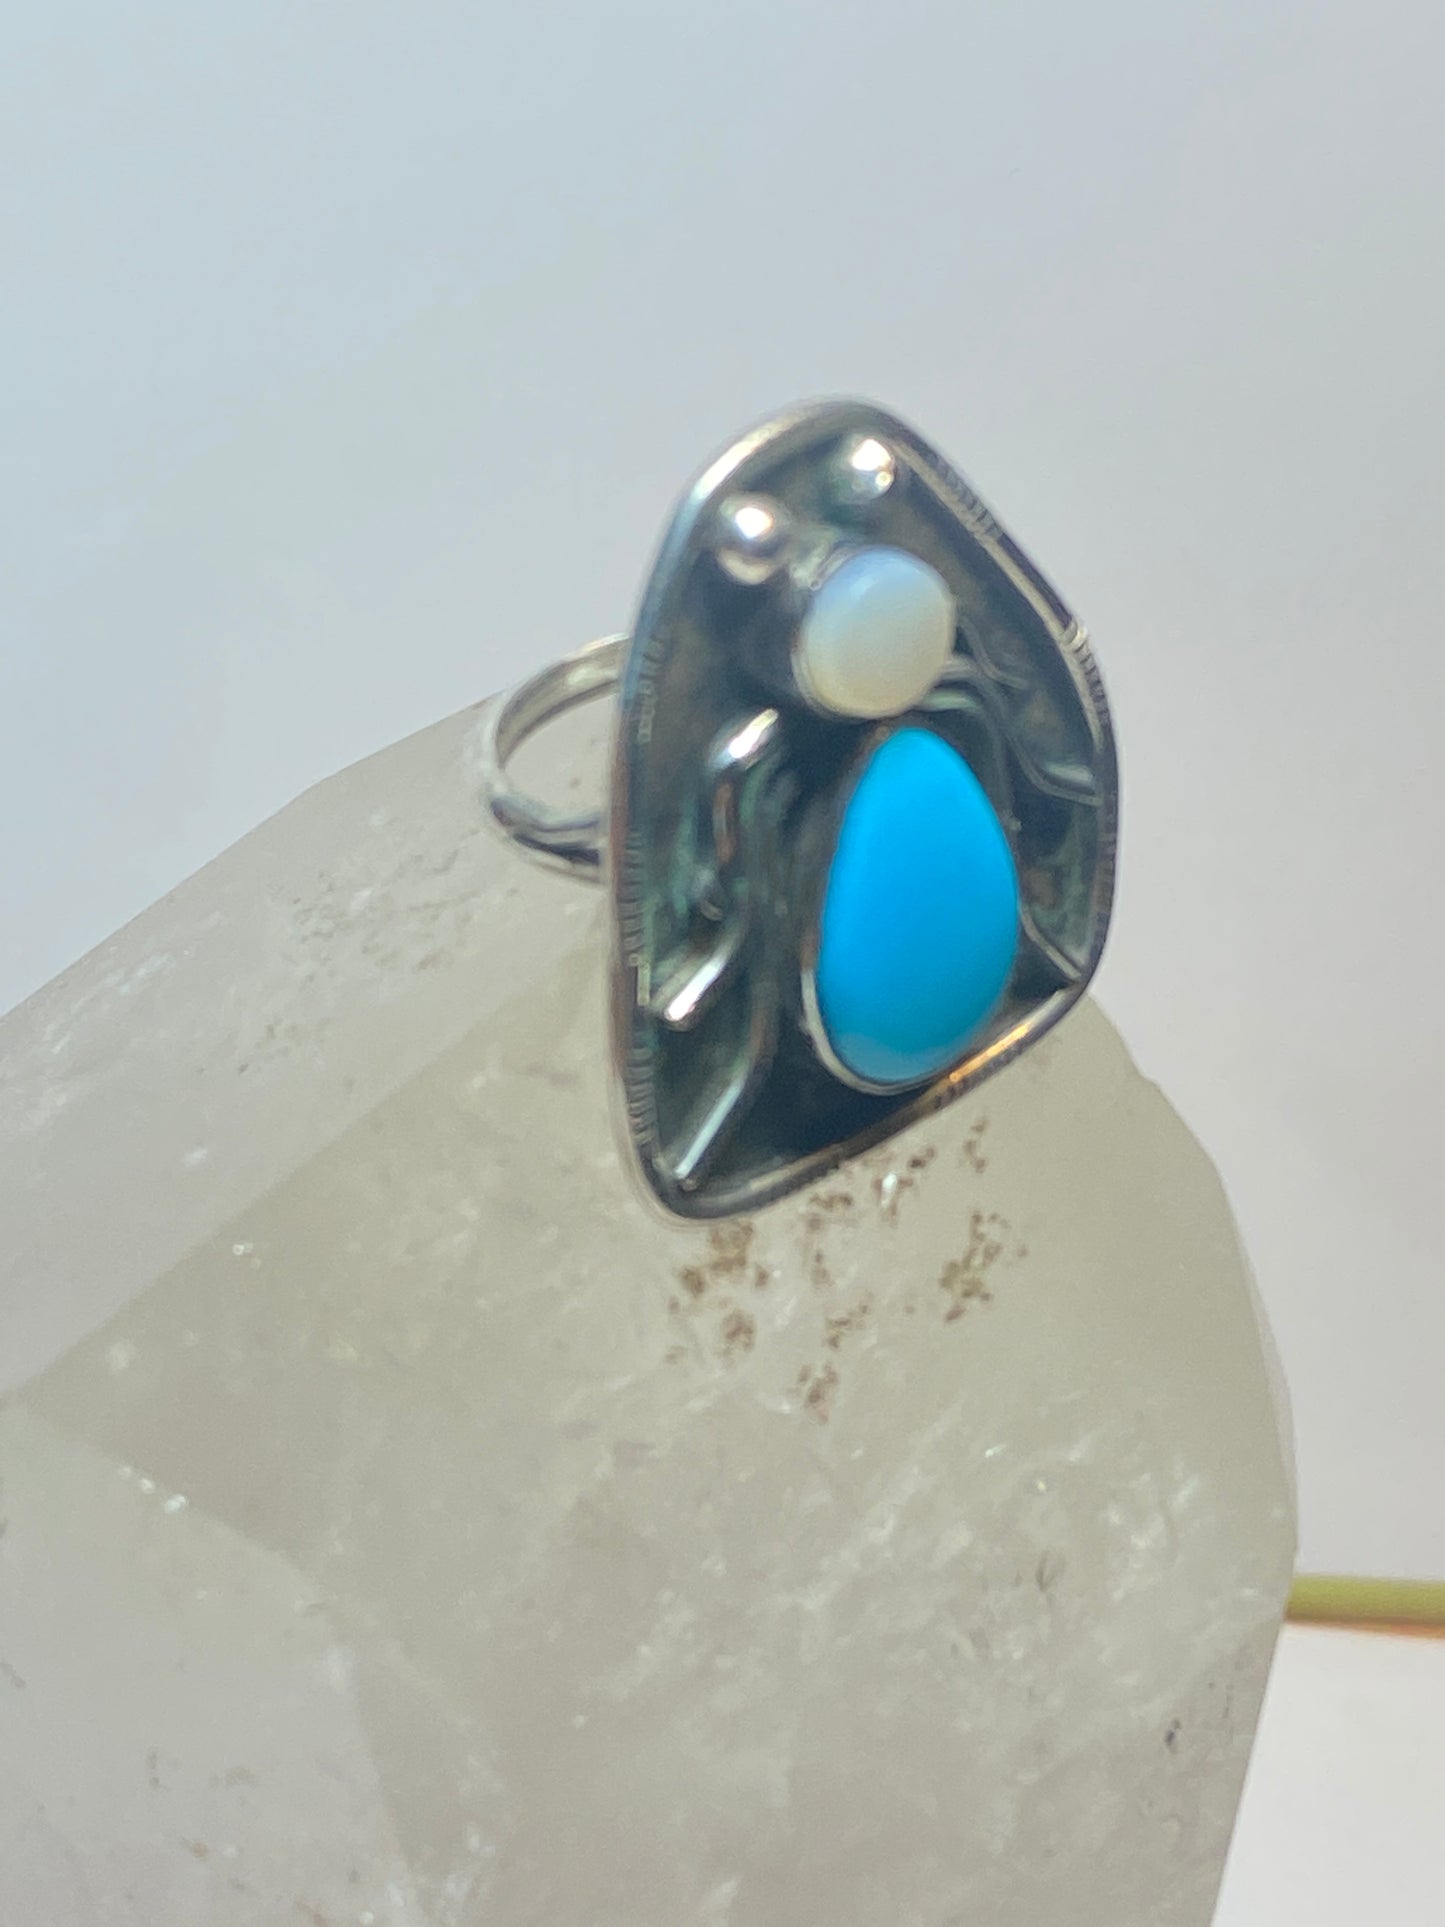 Spider ring Navajo turquoise mother of pearl sterling silver women